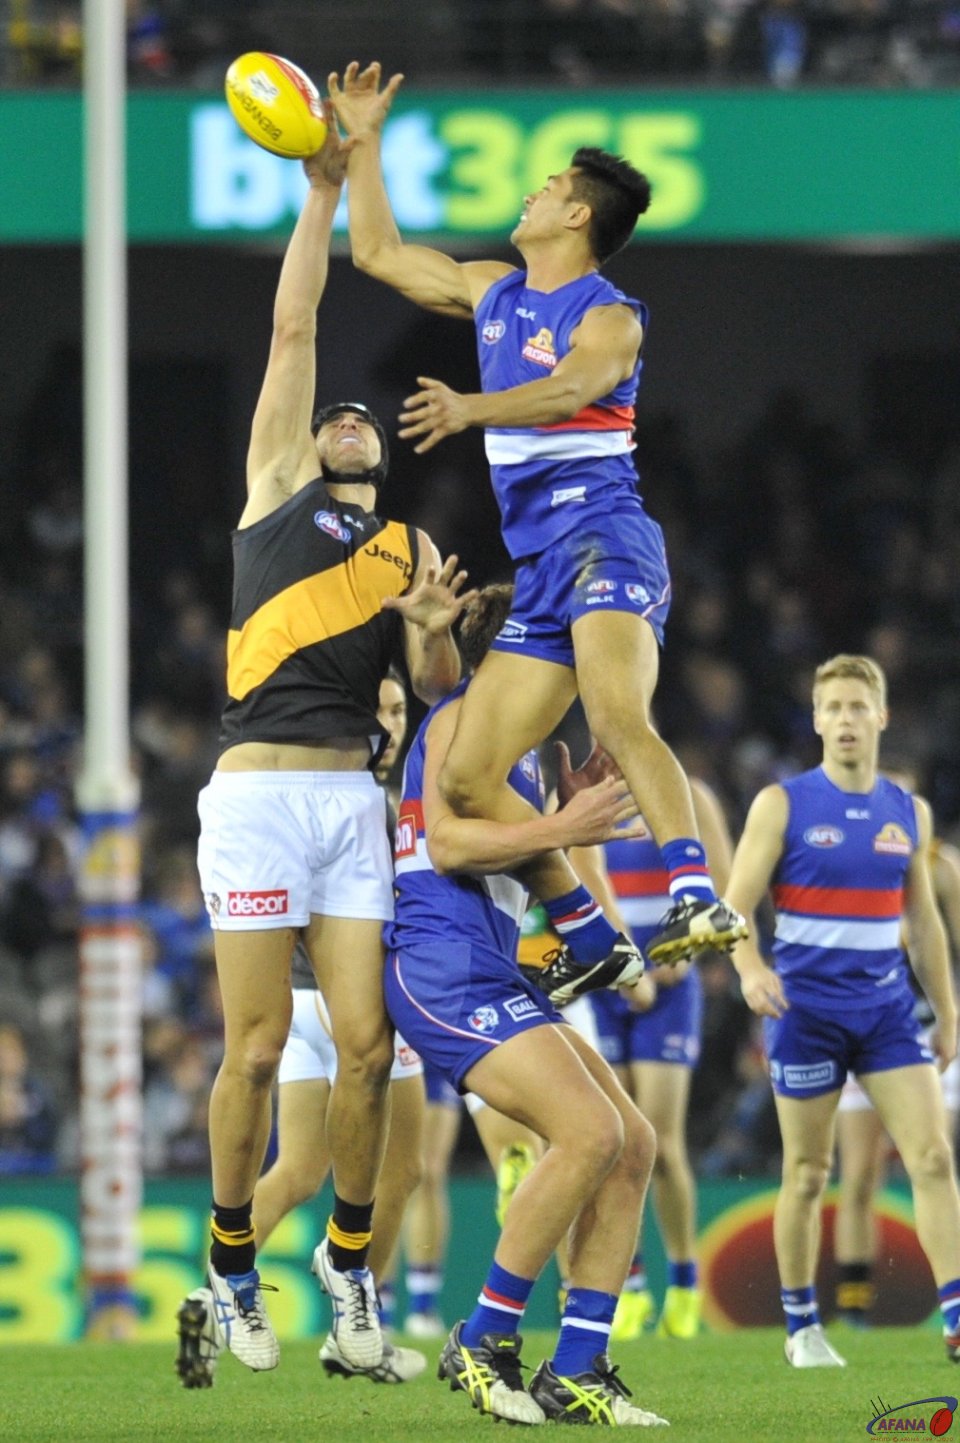 Lin Jong gets serious air against the tall Tigers ruckman